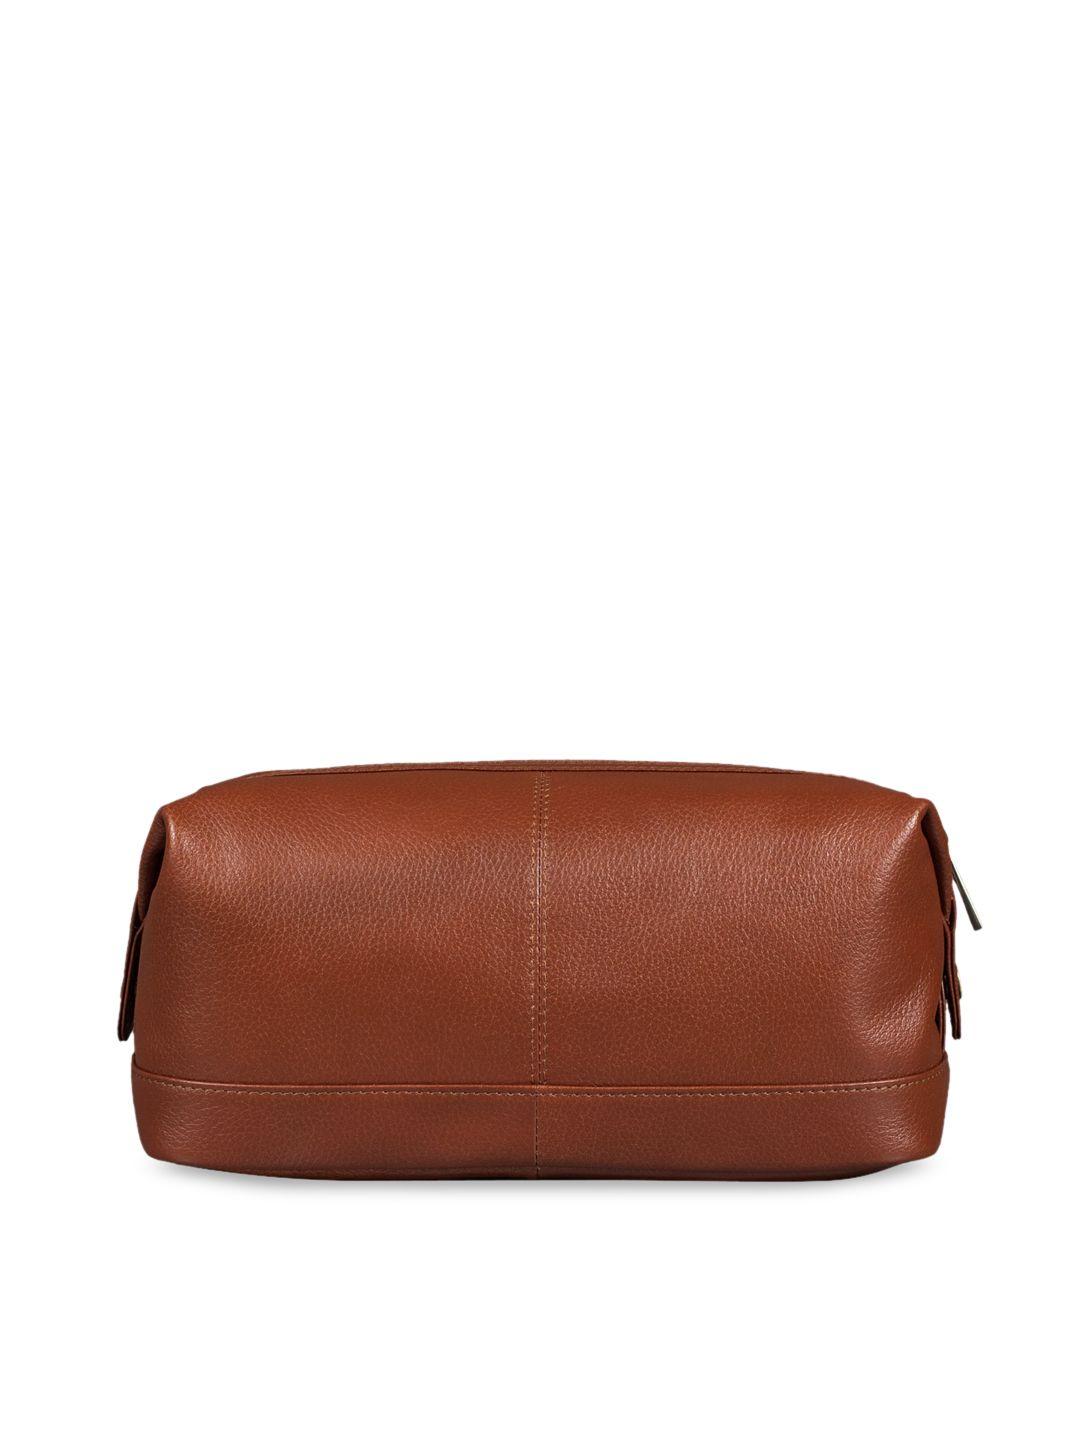 mai soli textured genuine leather travel pouch